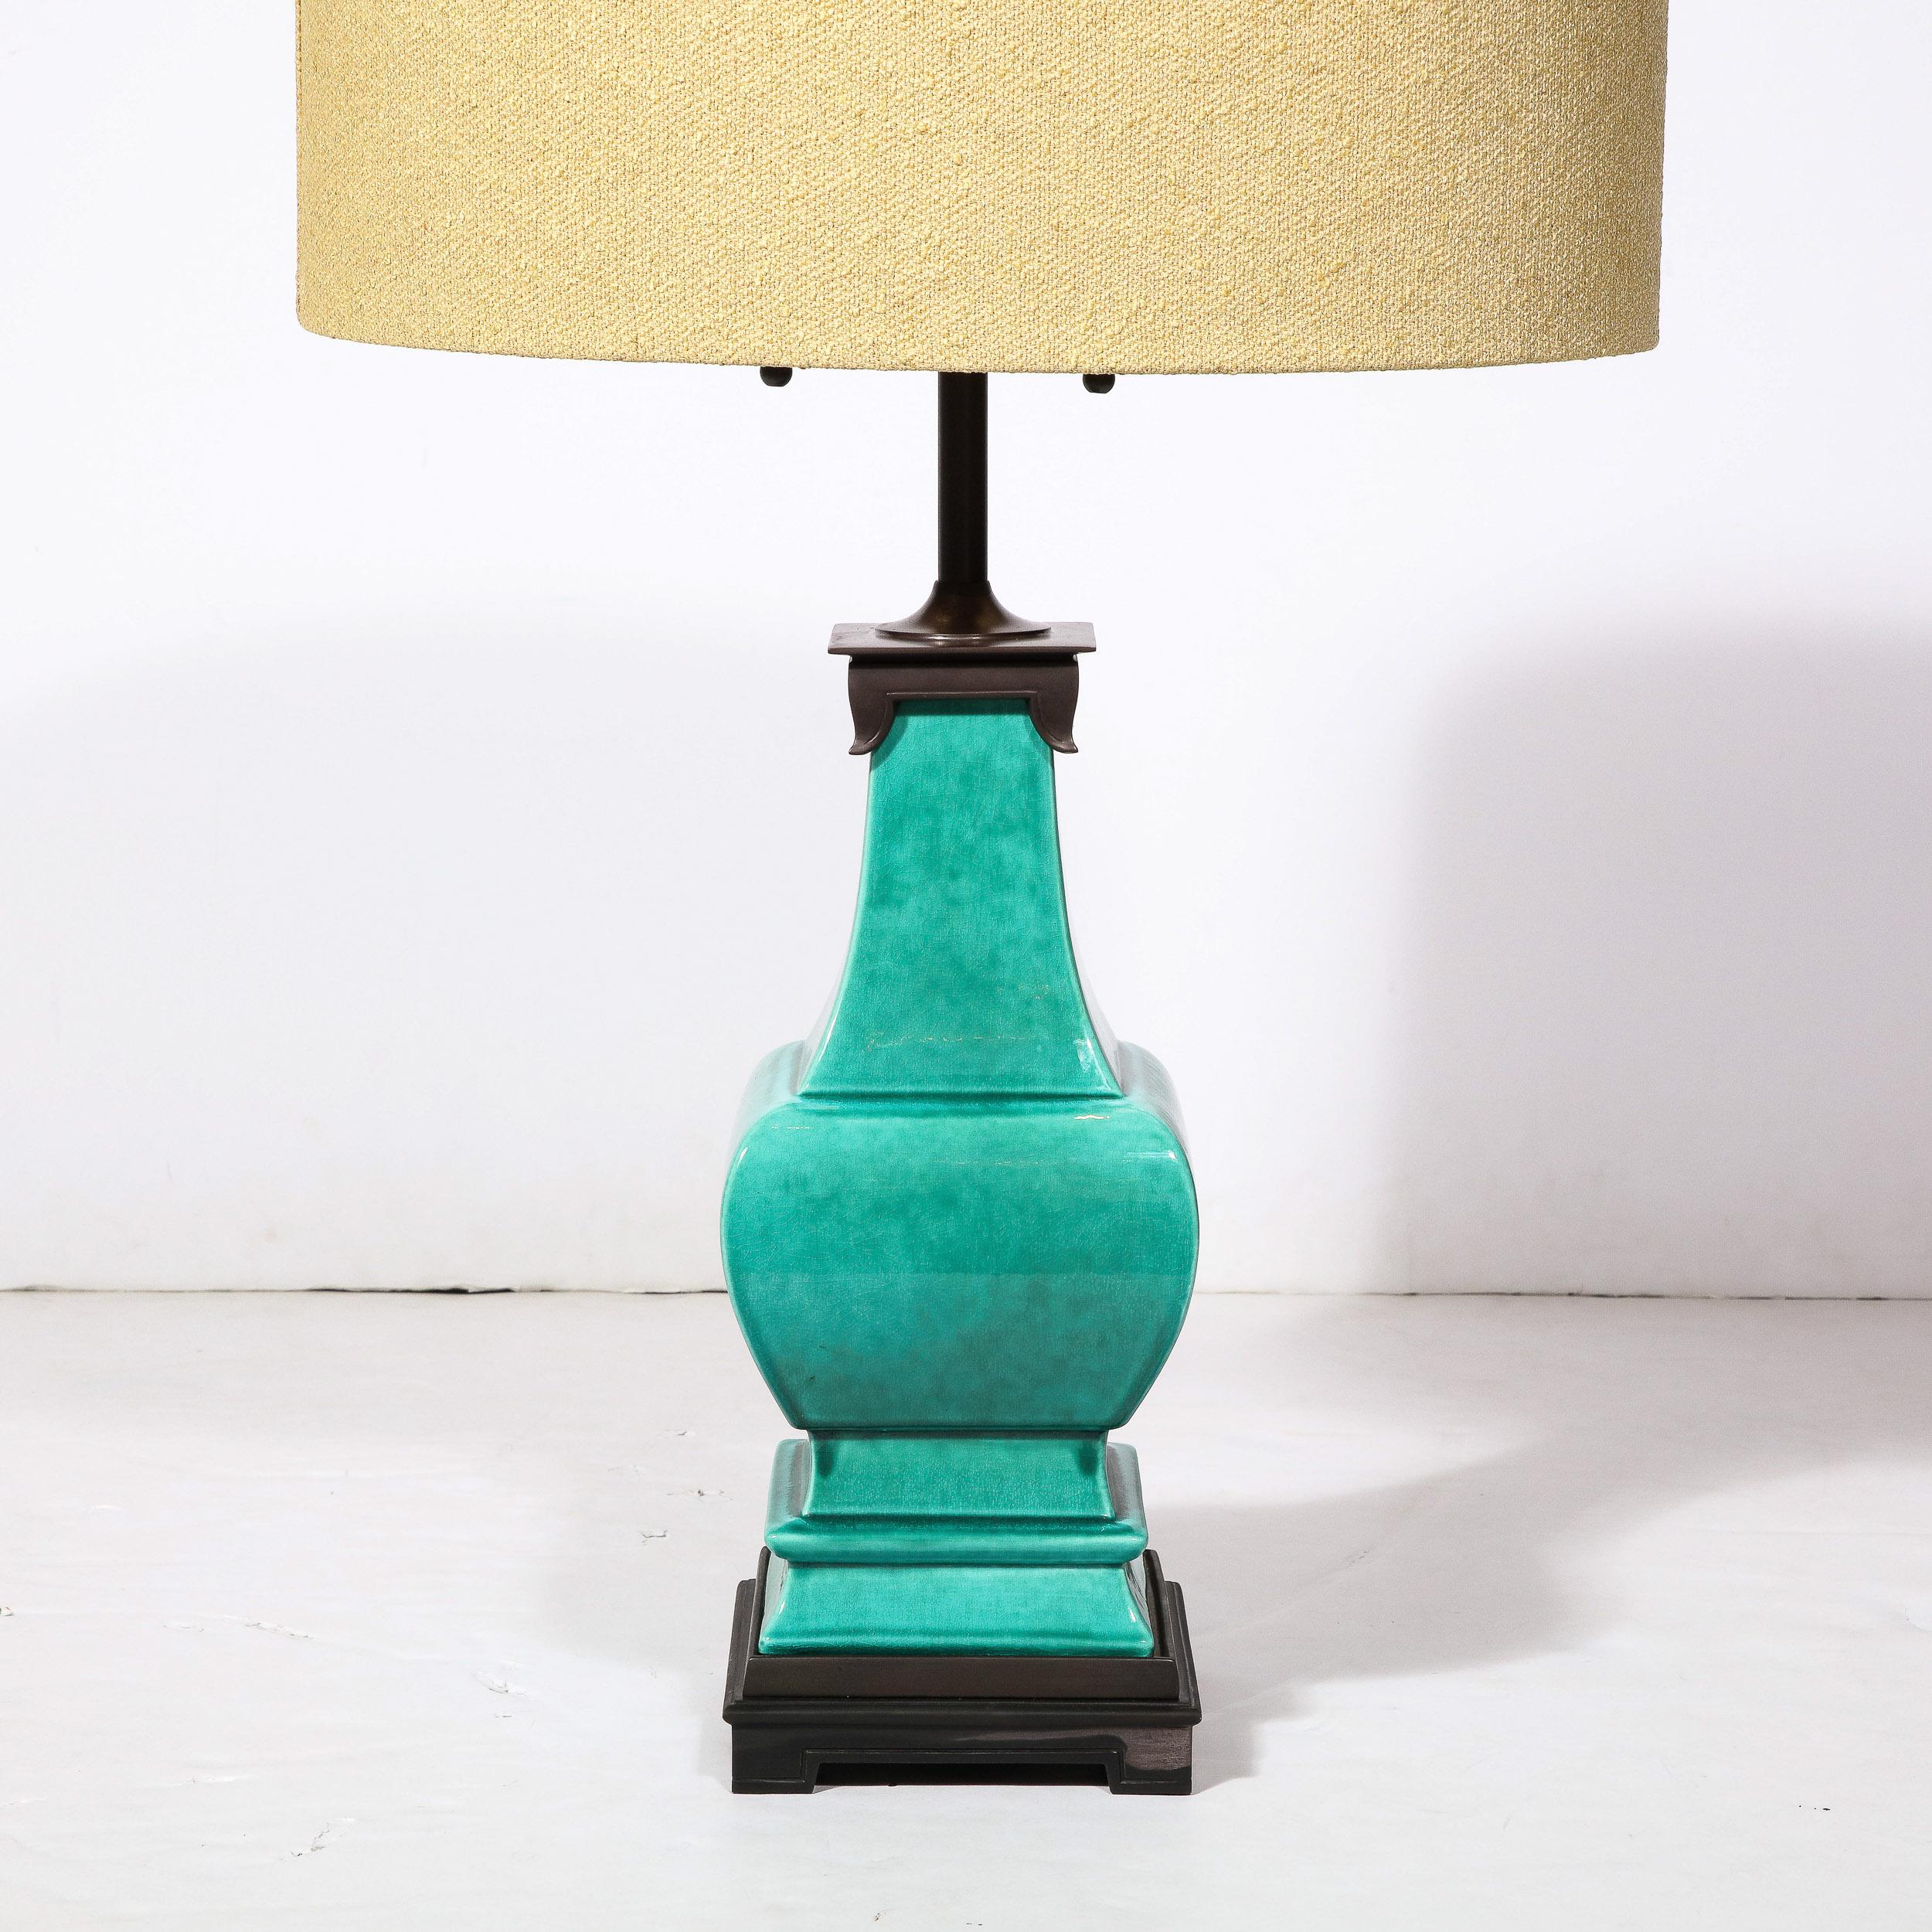 American Mid-Century Modernist Ceramic Turquoise Jade Table Lamps w/ Bronze Fittings For Sale